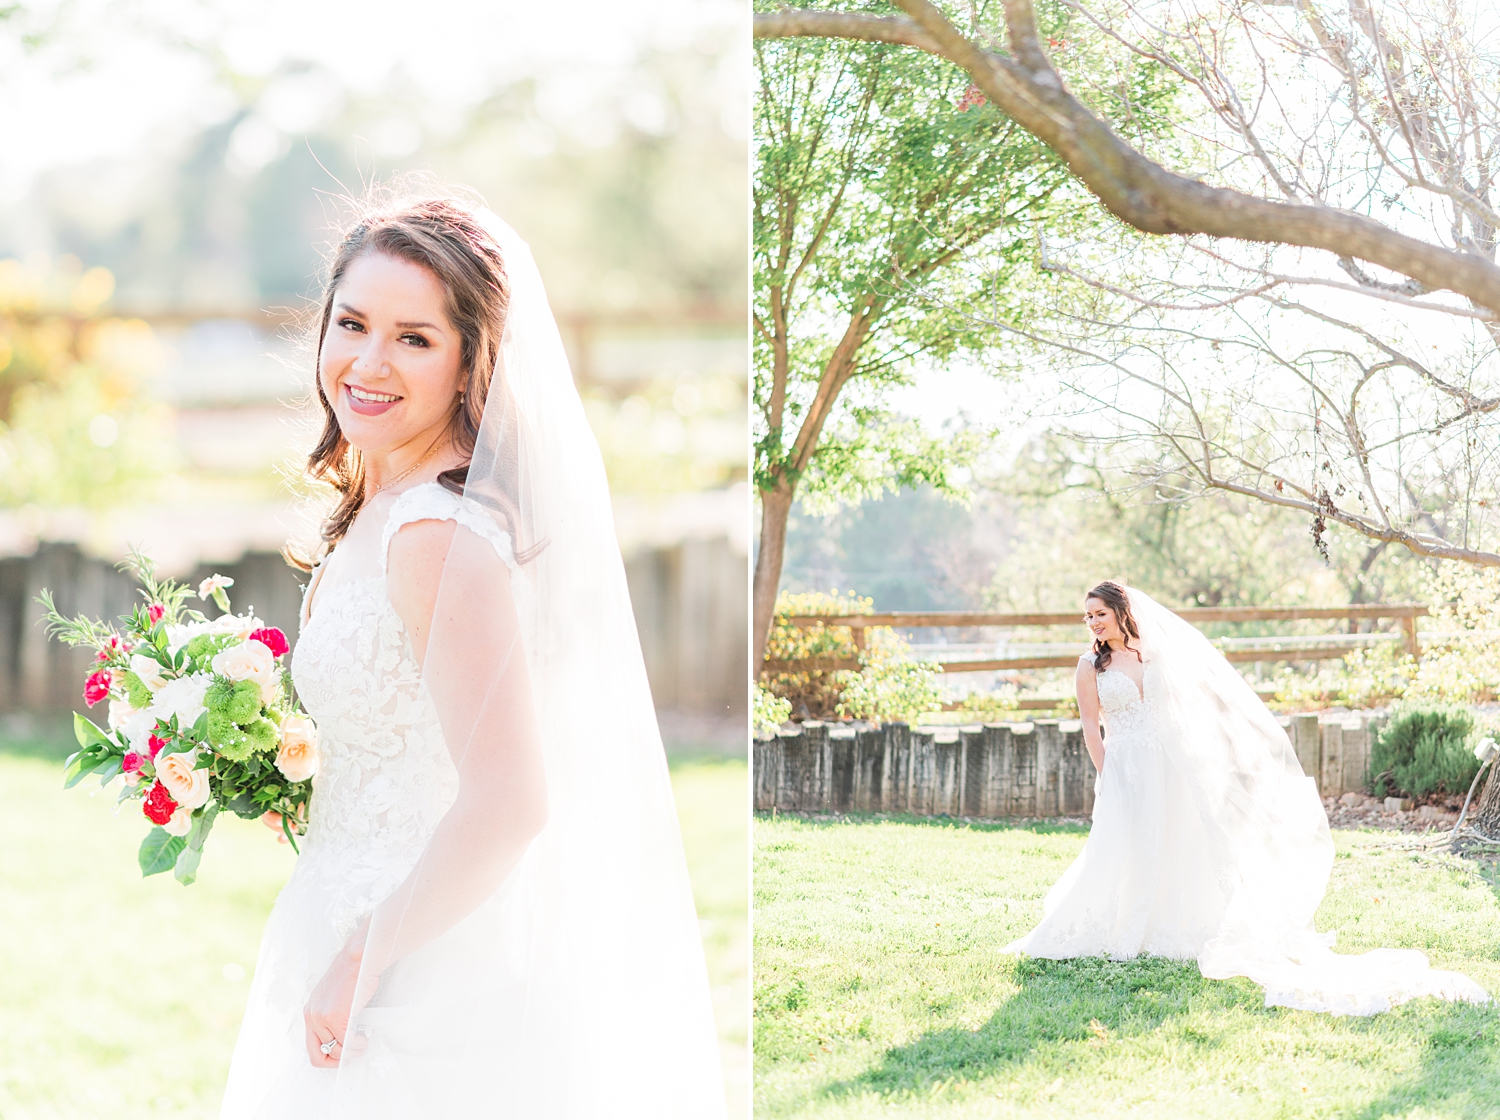 Bridal Session in a winery in temecula from a Temecula Wedding Photographer_0007.jpg